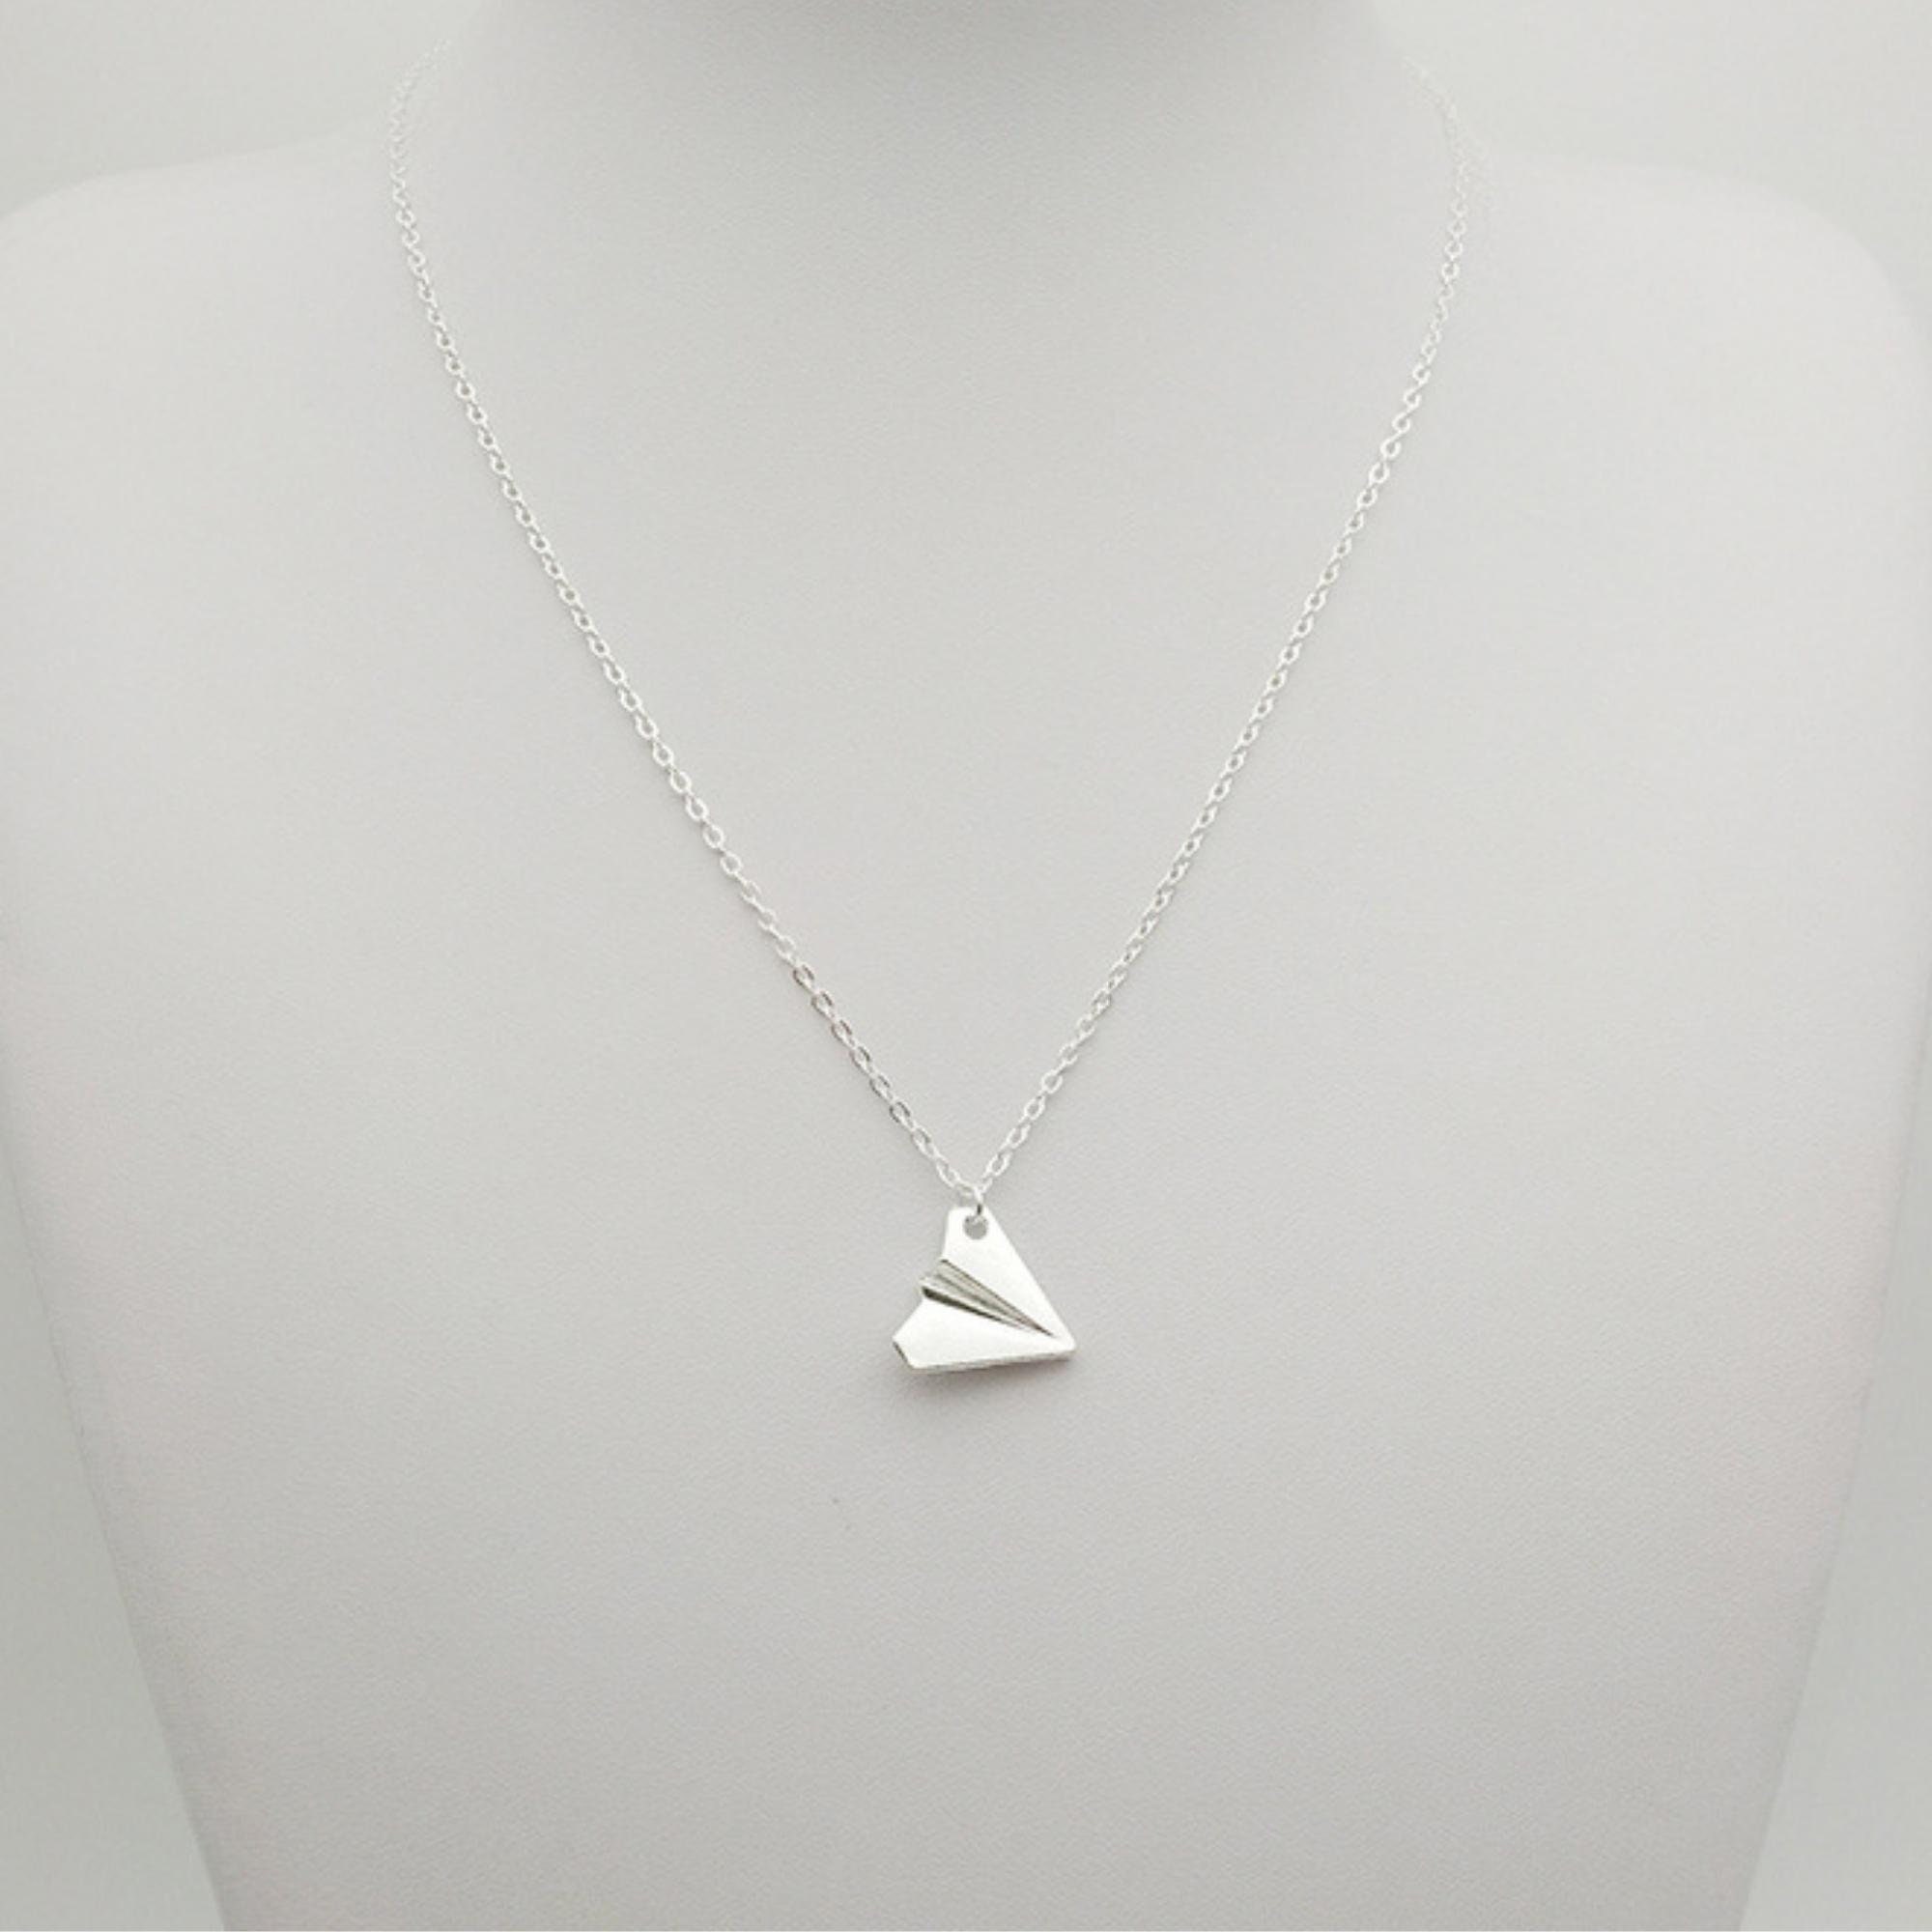 Silver Paper Airplane Charm Necklace Harry Styles Inspired - Etsy